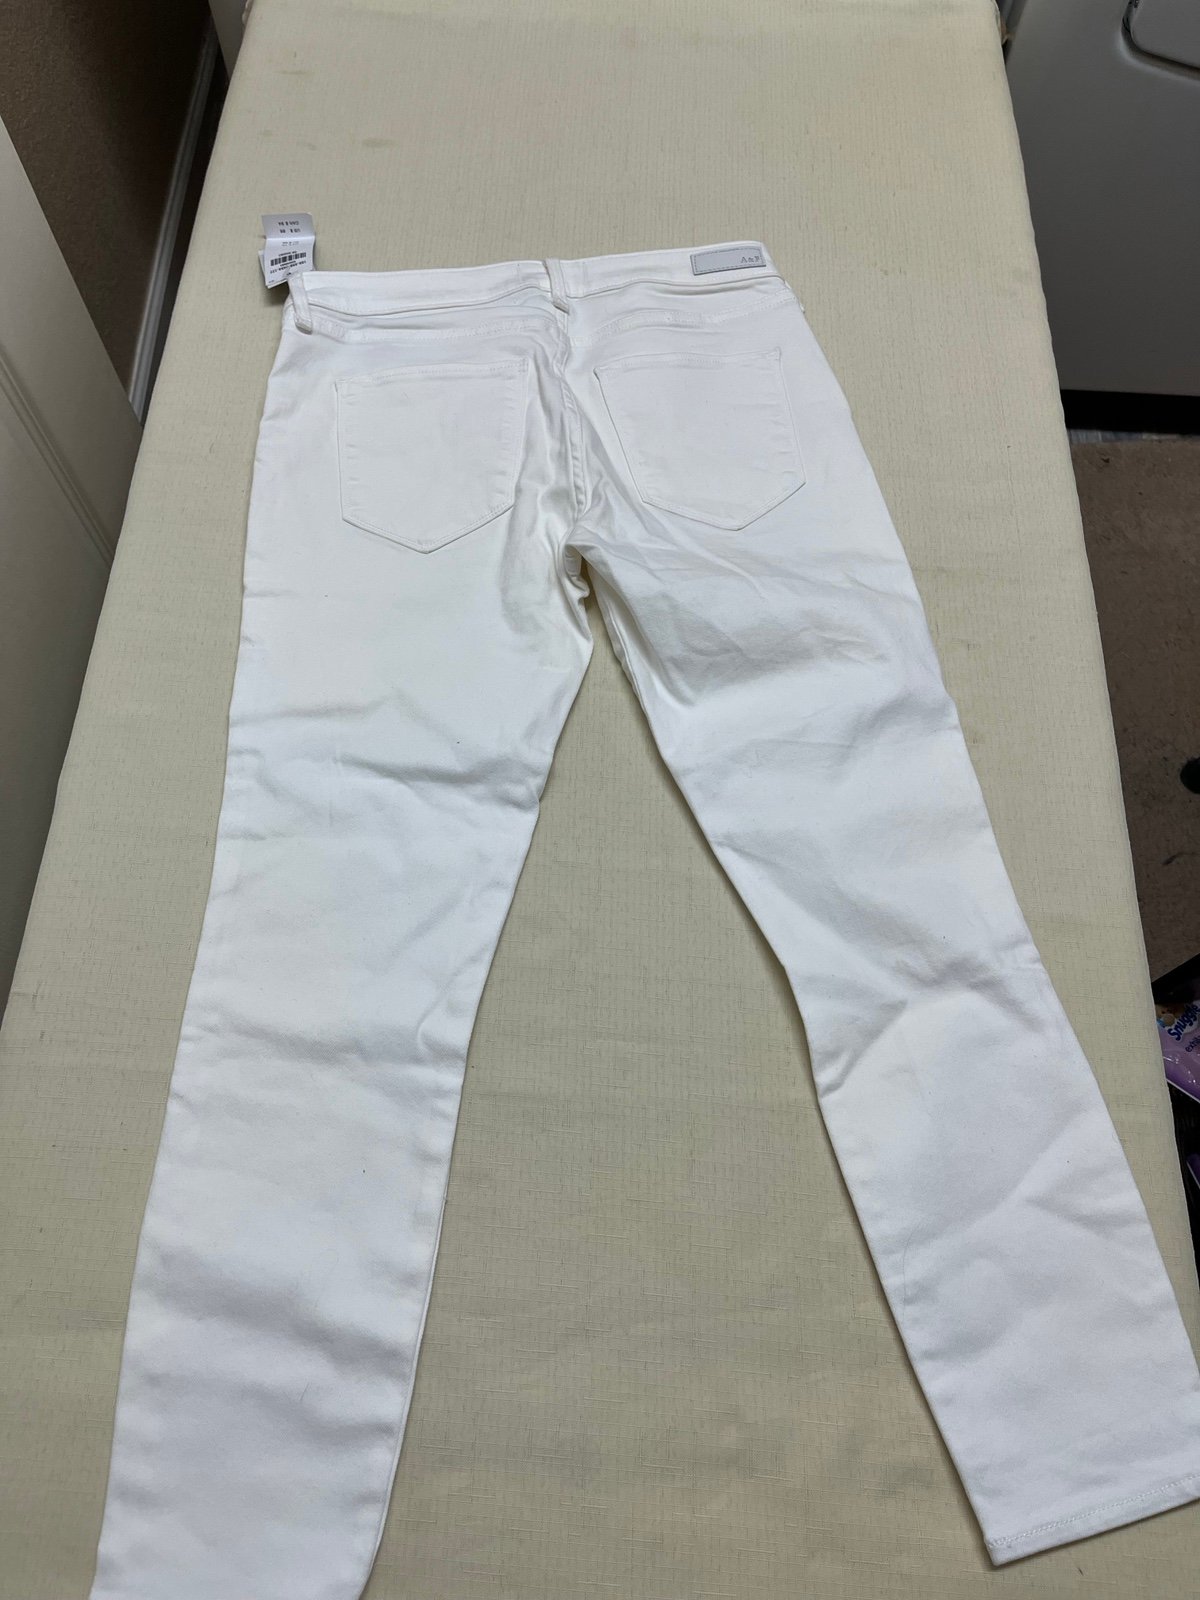 Perfect NWT Abercrombie & Fitch size 2 short (26w) White Harper low rise ankle jeans K9E9uFERF just for you